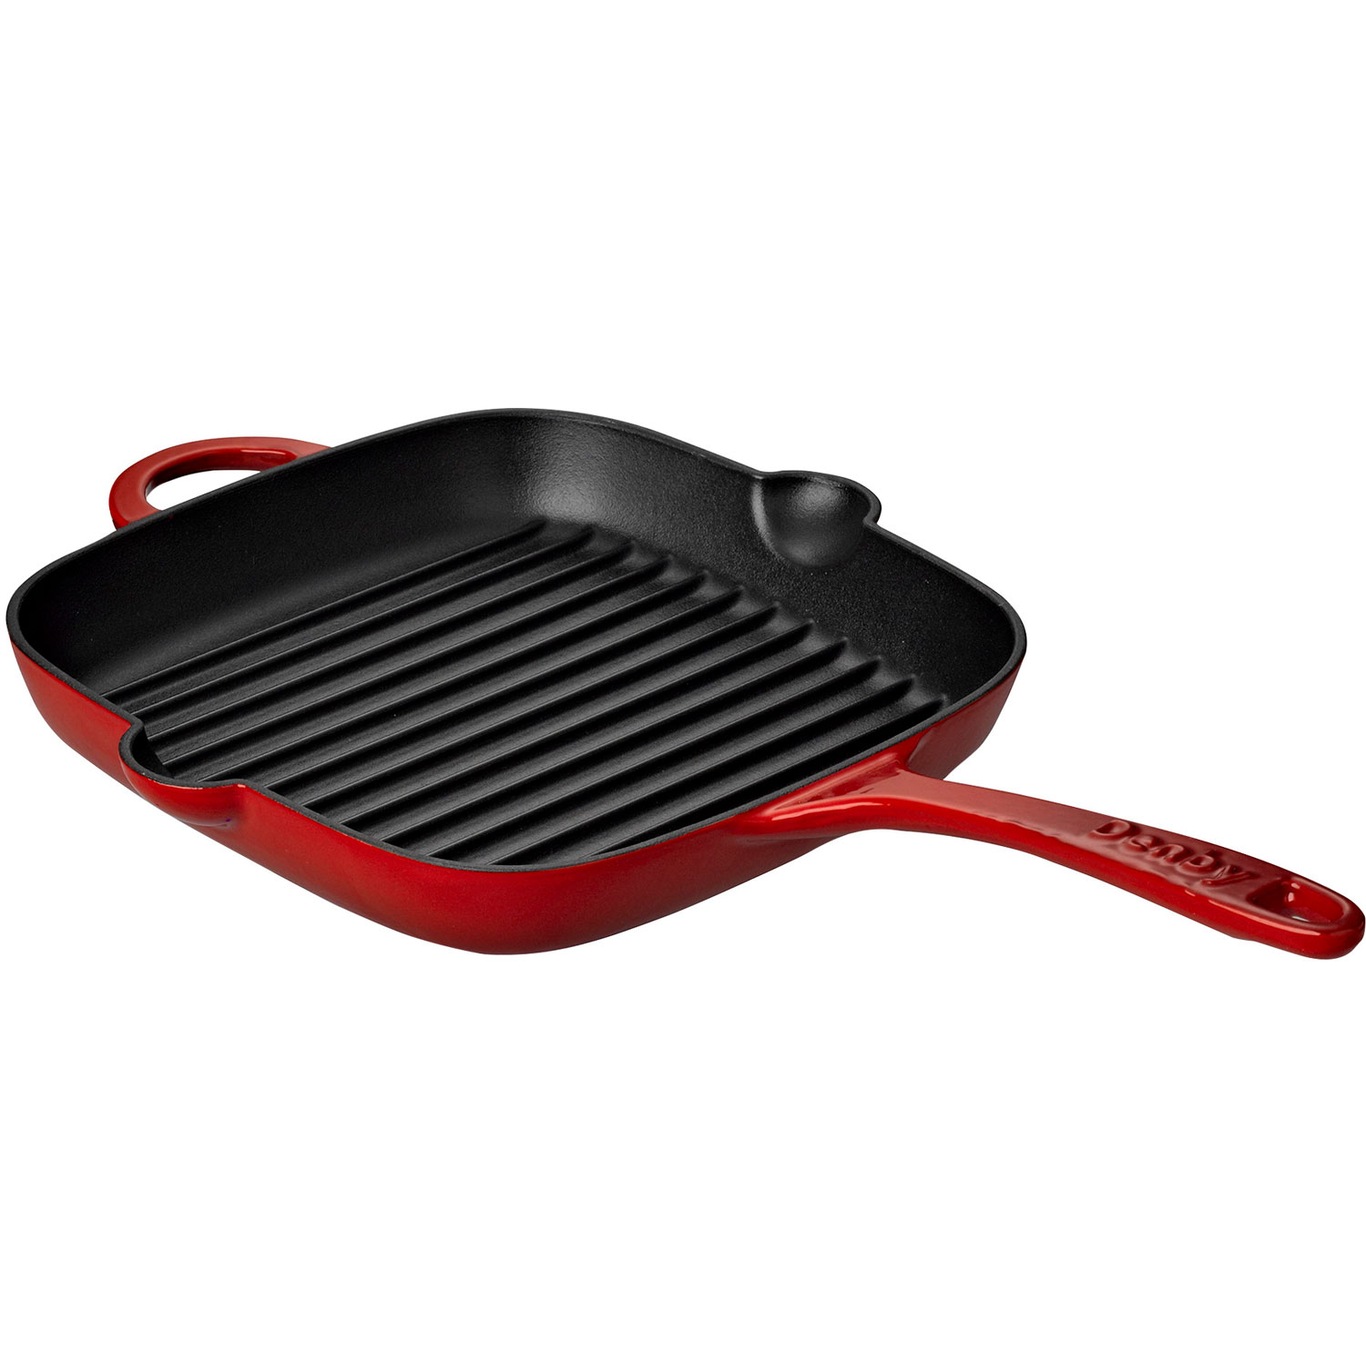 Pomegranate Grill Pan 25 cm, Red